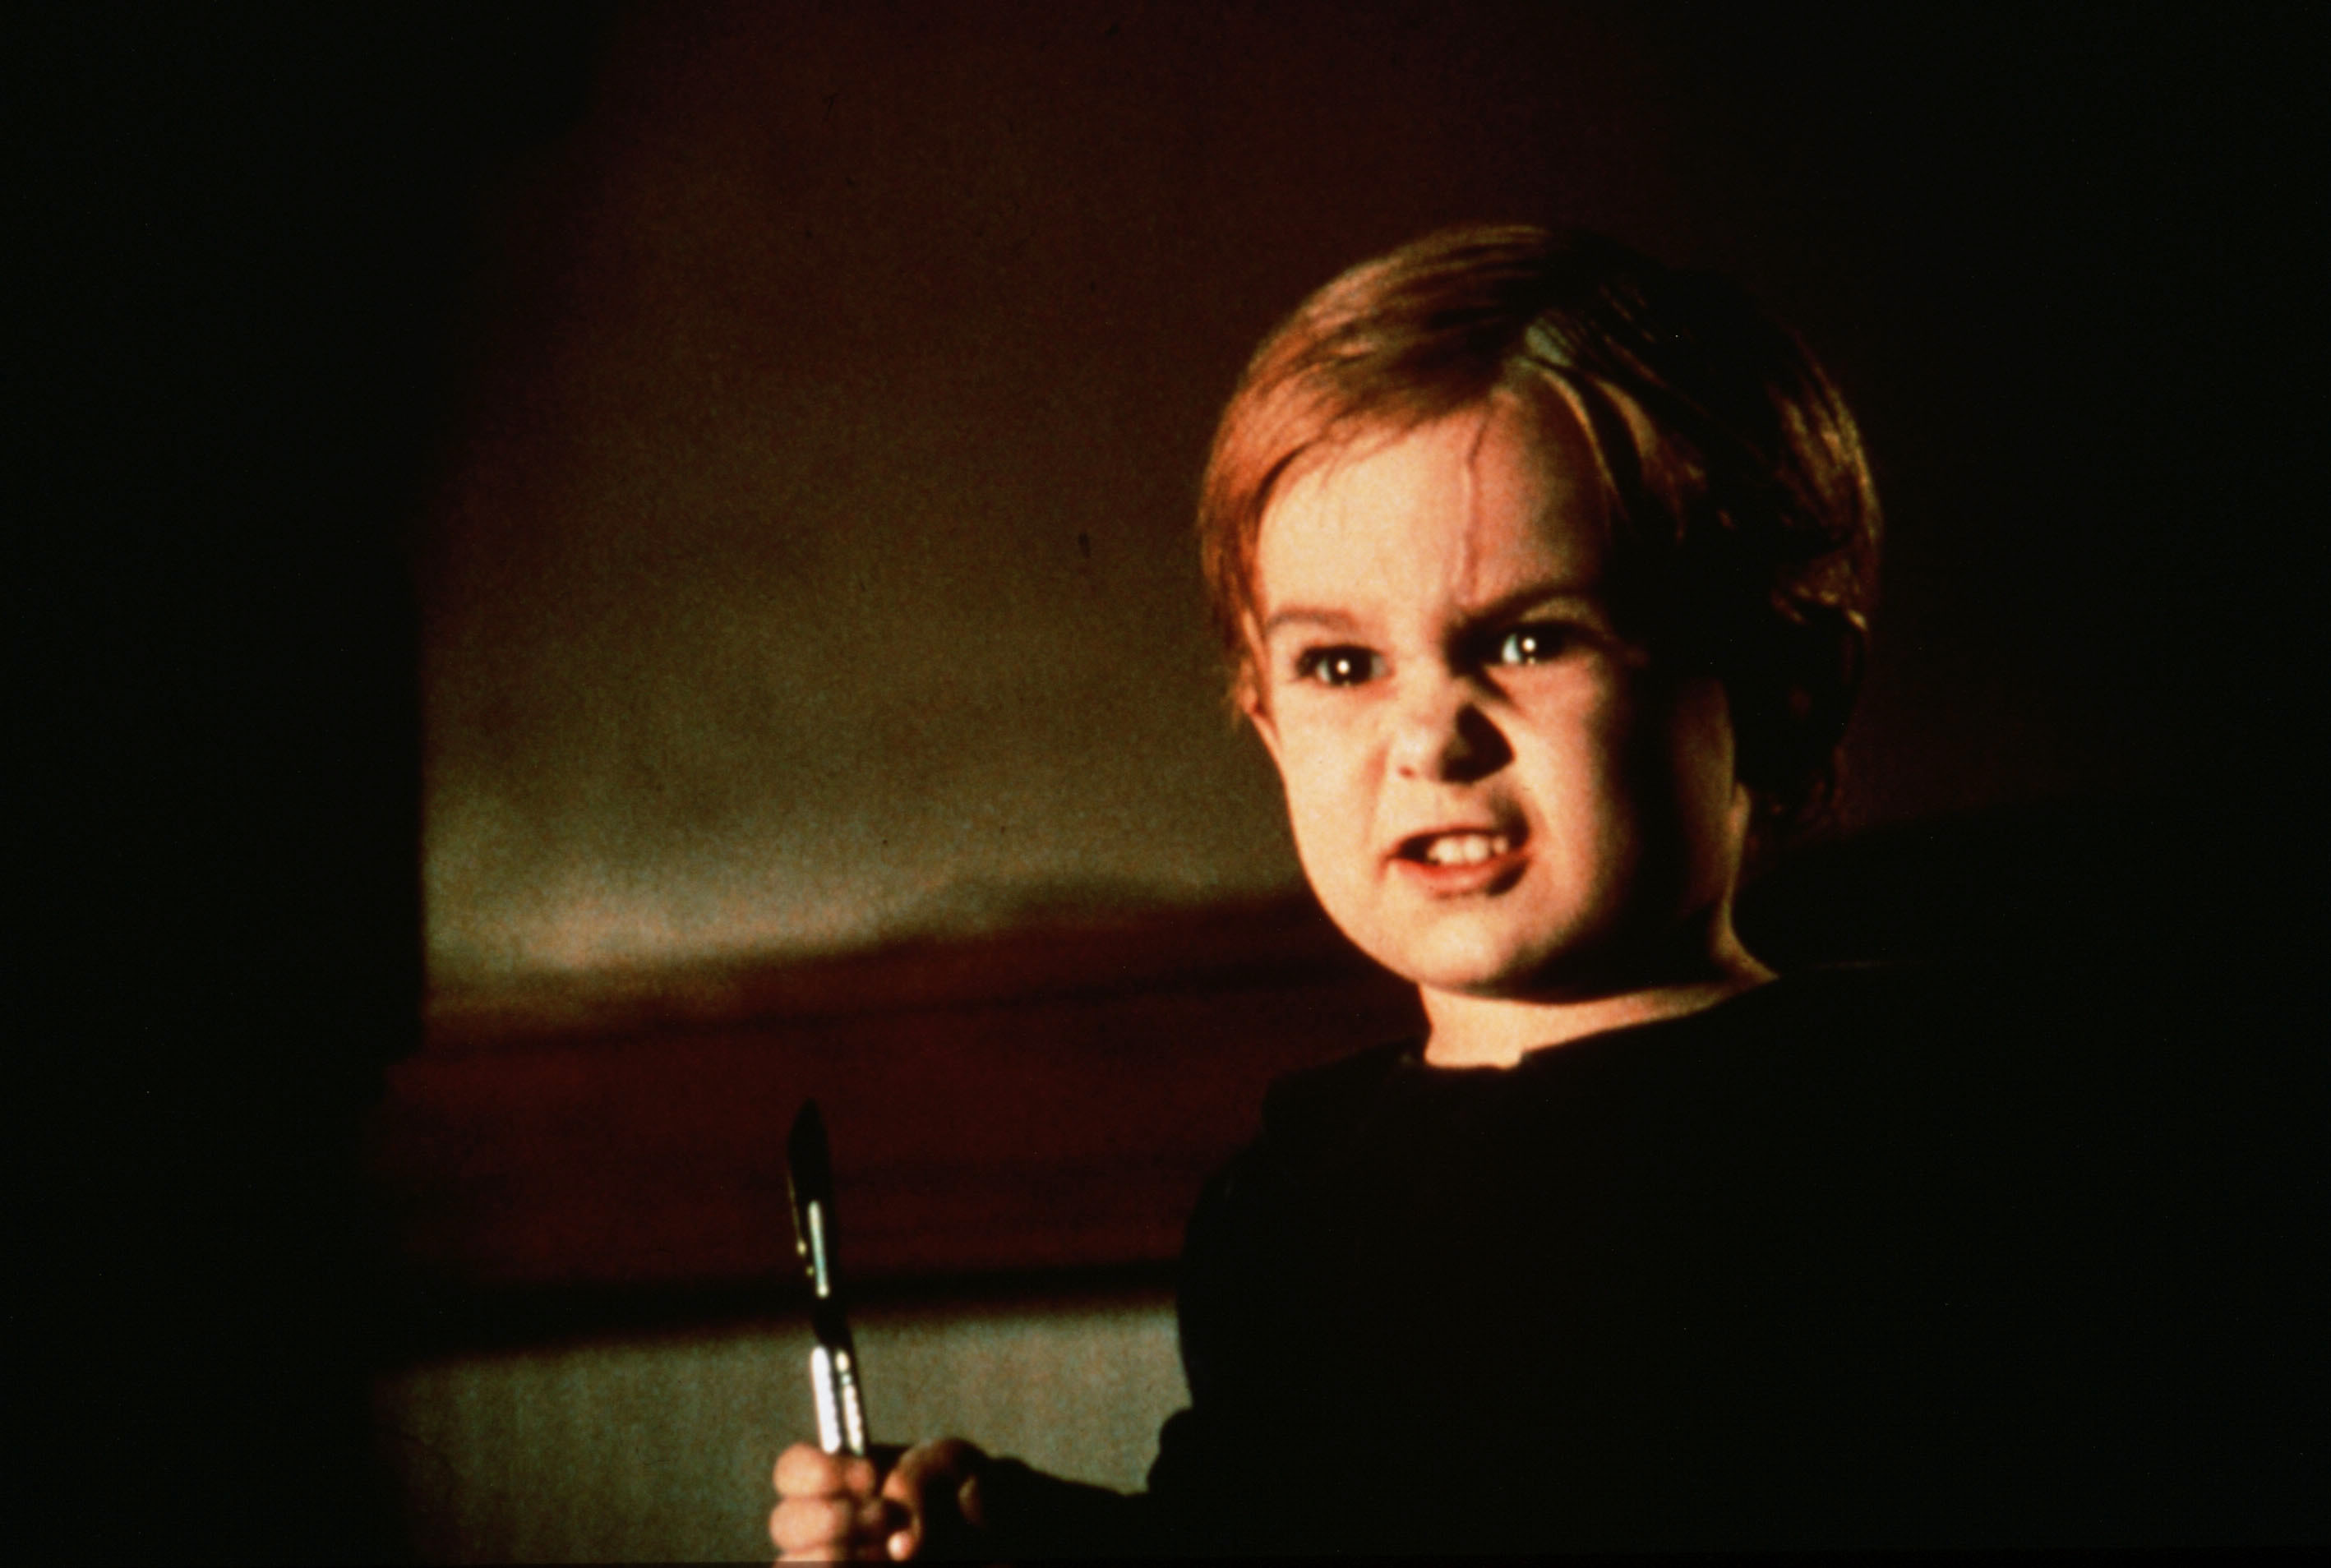 <p>Miko Hughes started acting at 2 in movies like "Pet Sematary," "Kindergarten Cop" and "Jack the Bear." He also played Michelle's bratty friend Aaron Bailey on "Full House."</p>